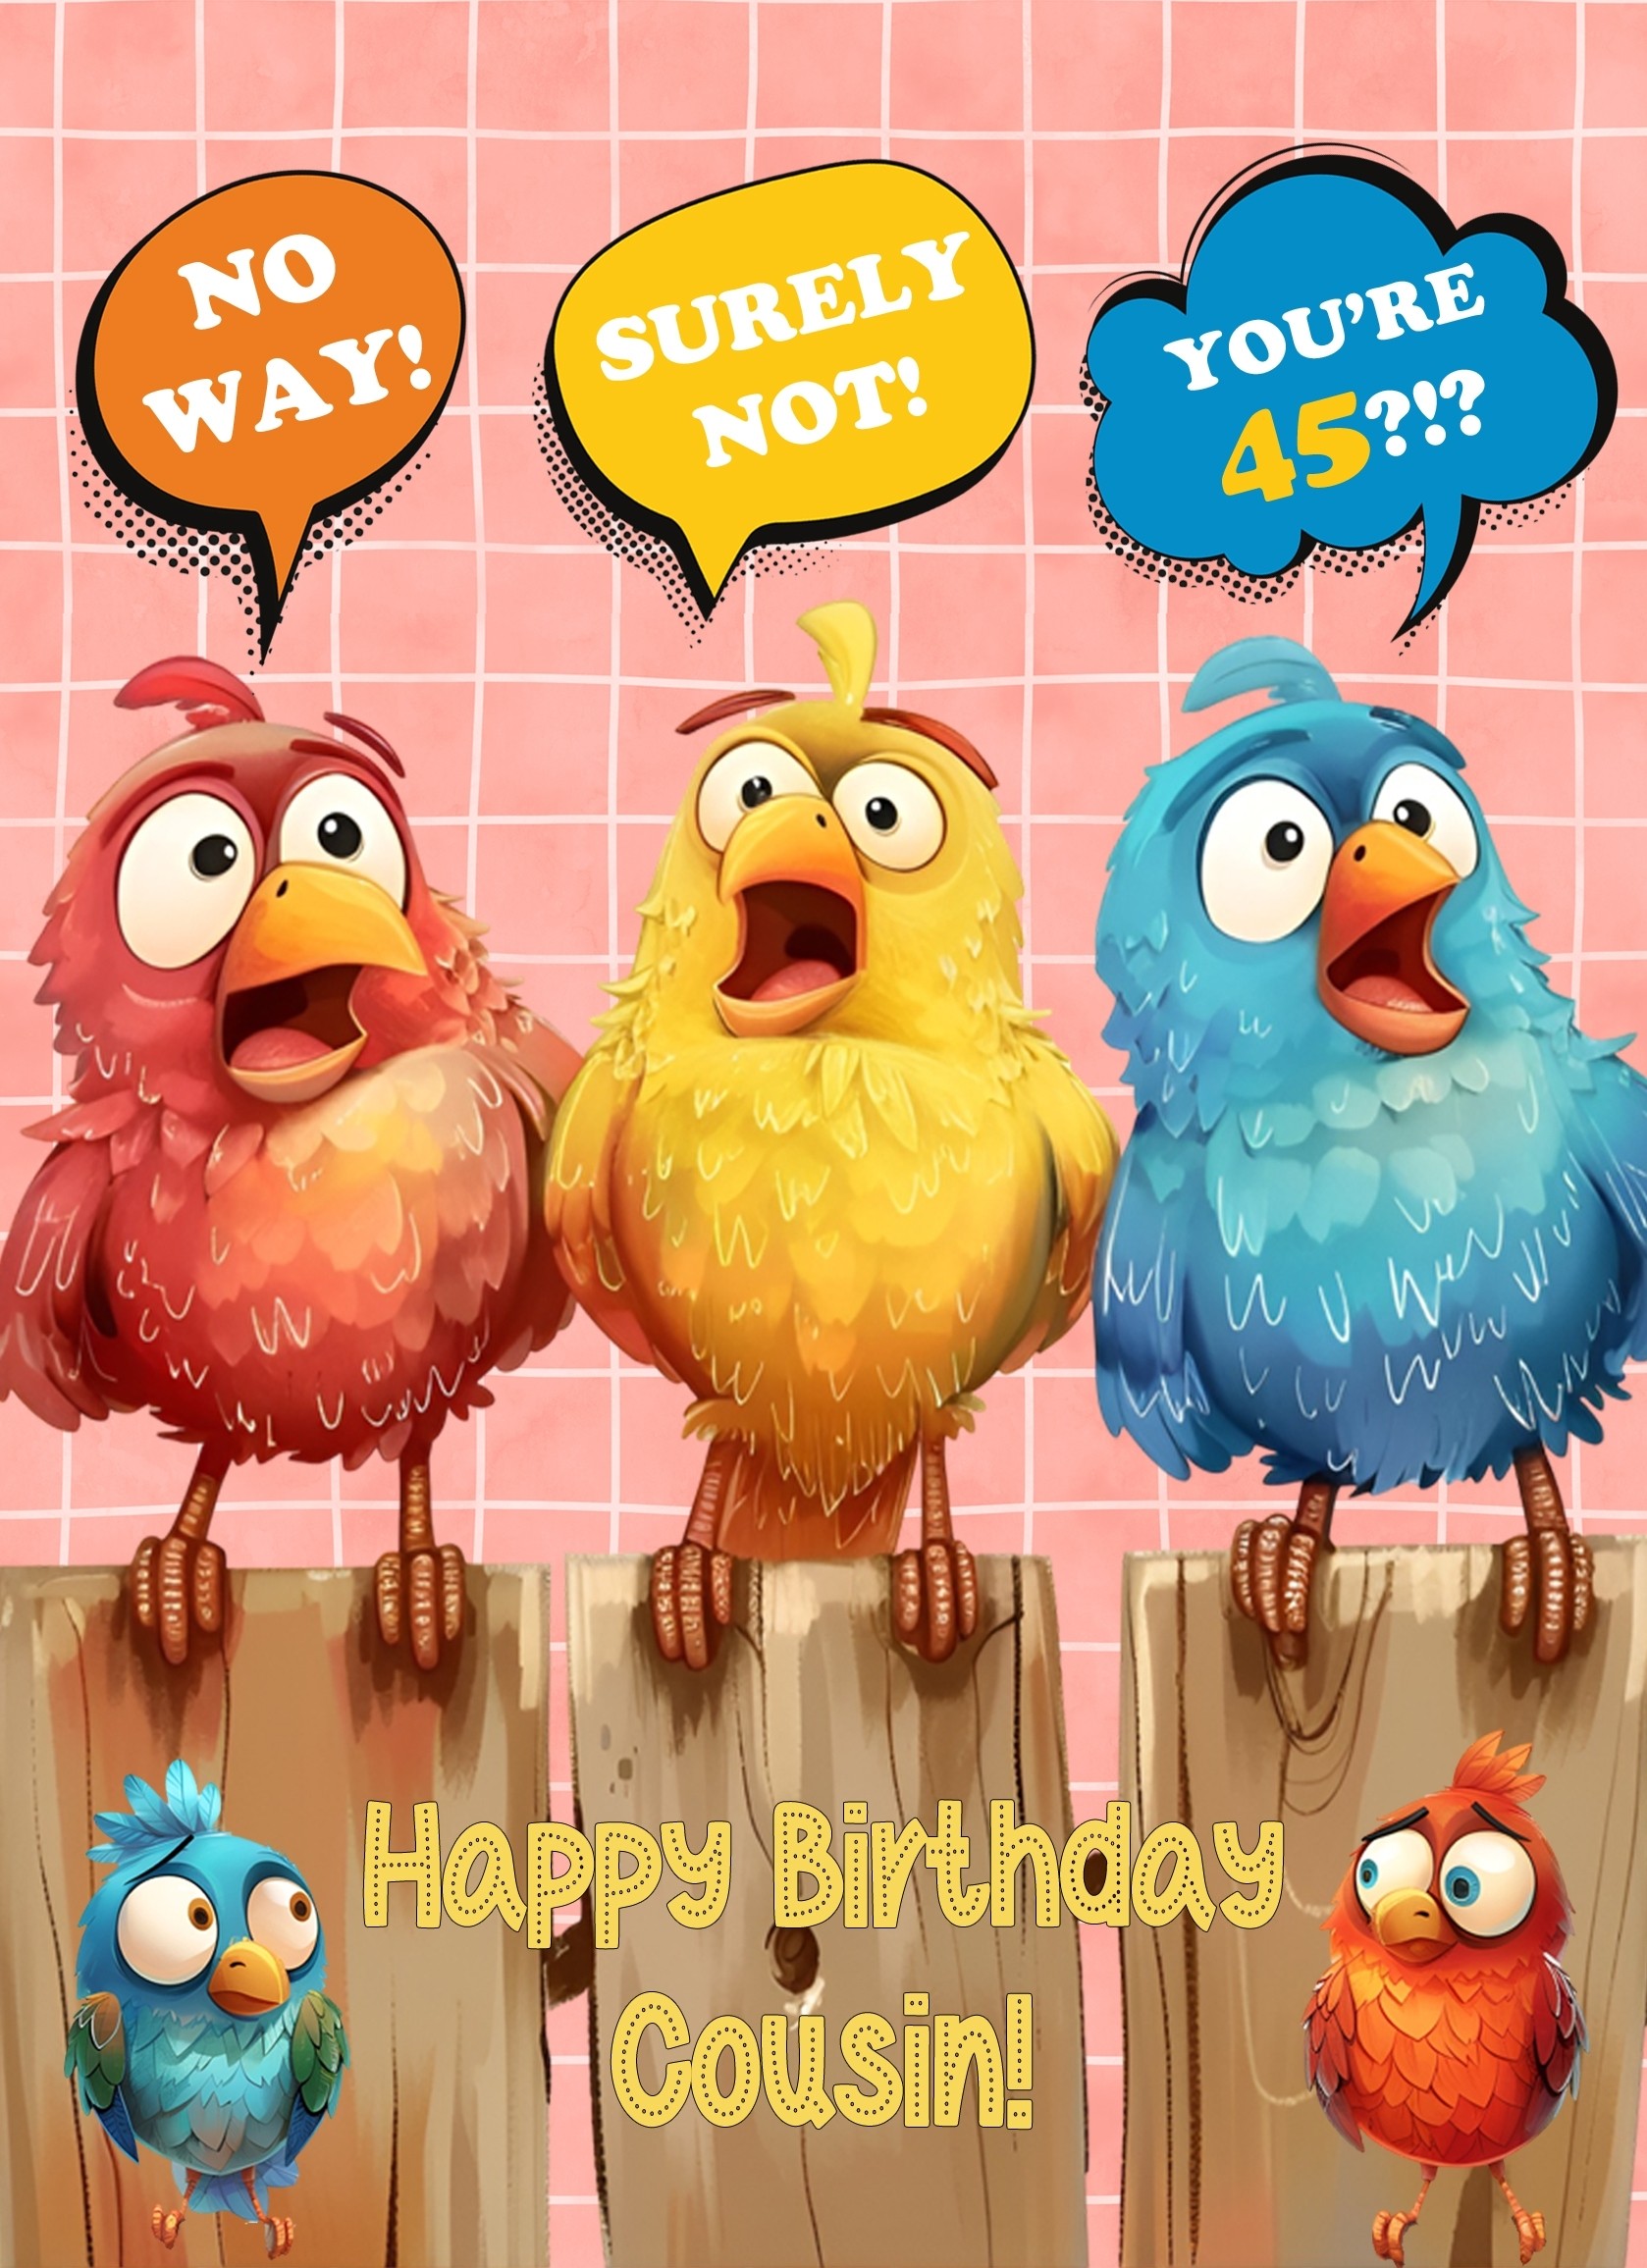 Cousin 45th Birthday Card (Funny Birds Surprised)